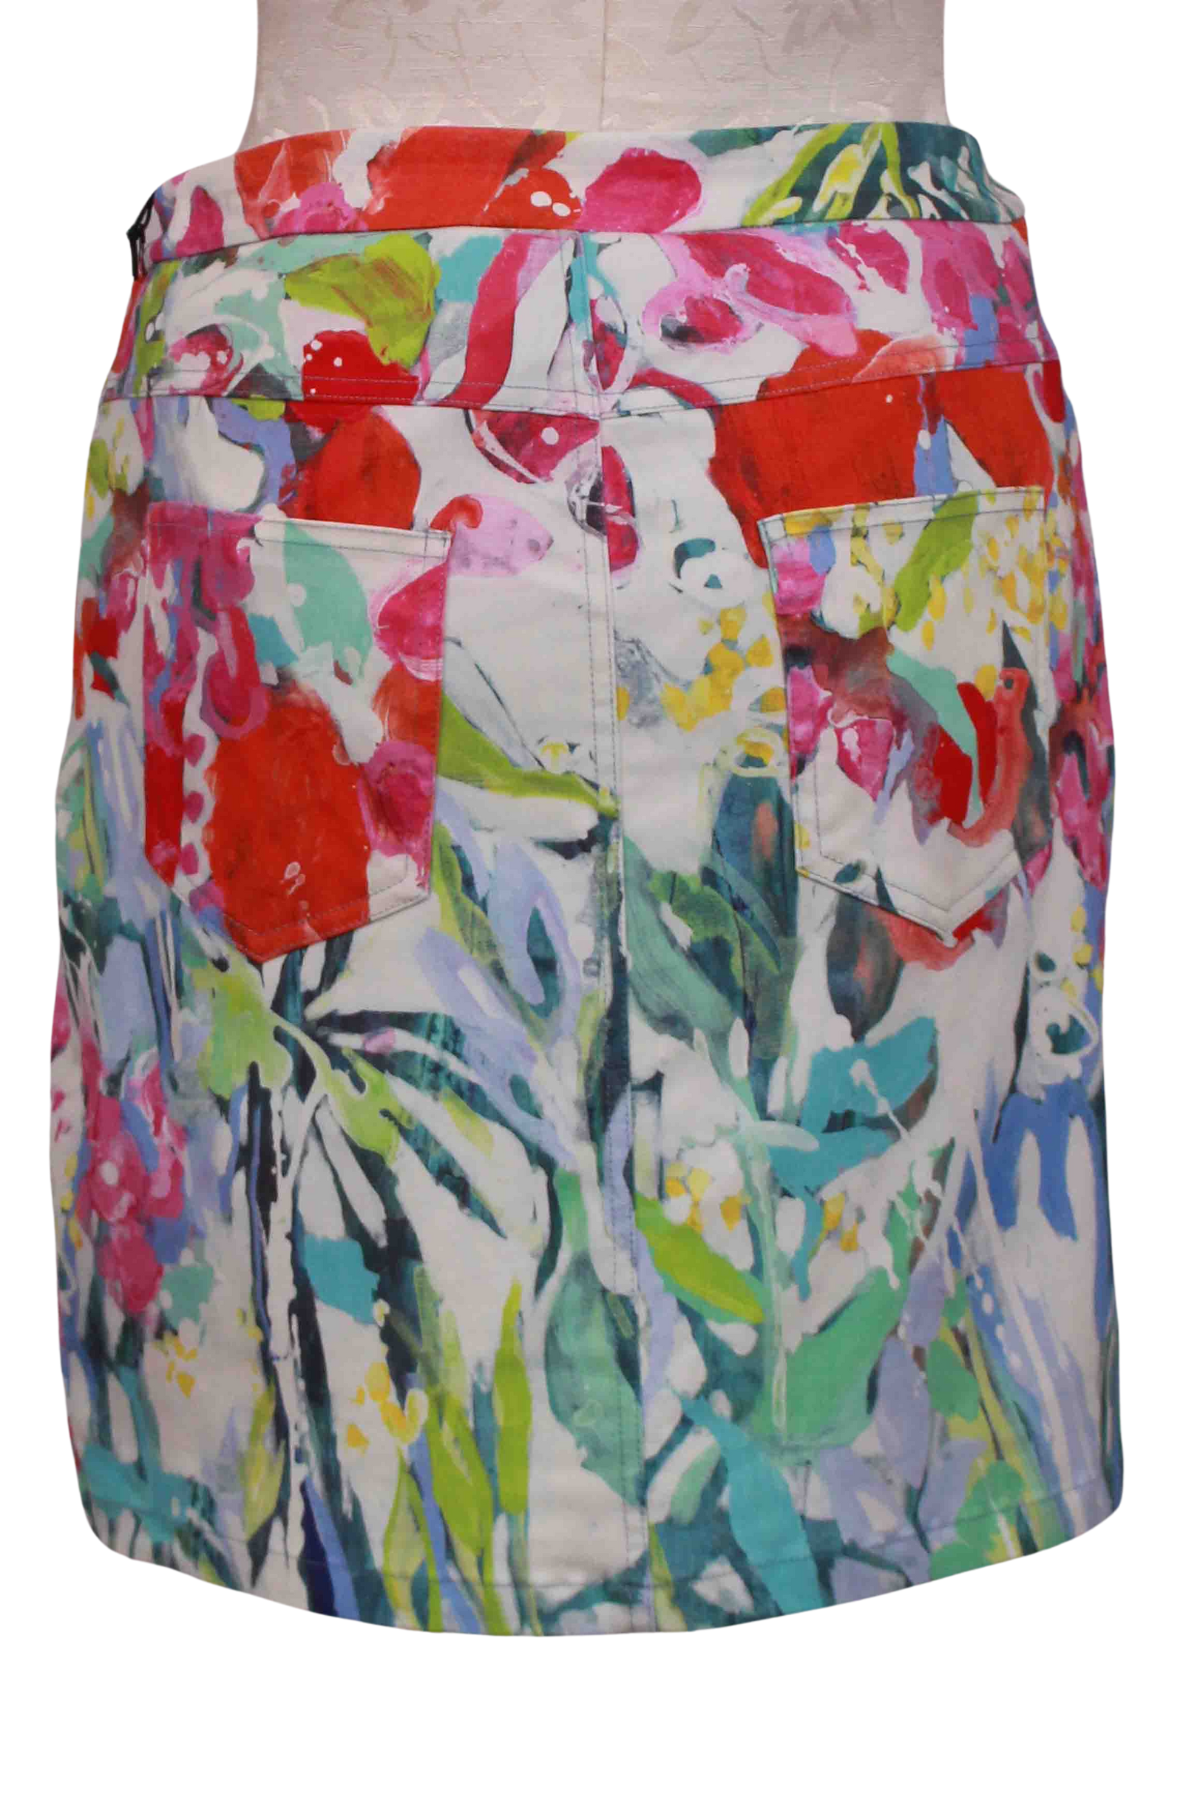 back view of At Liberty In the Garden Skort by Claire Desjardins